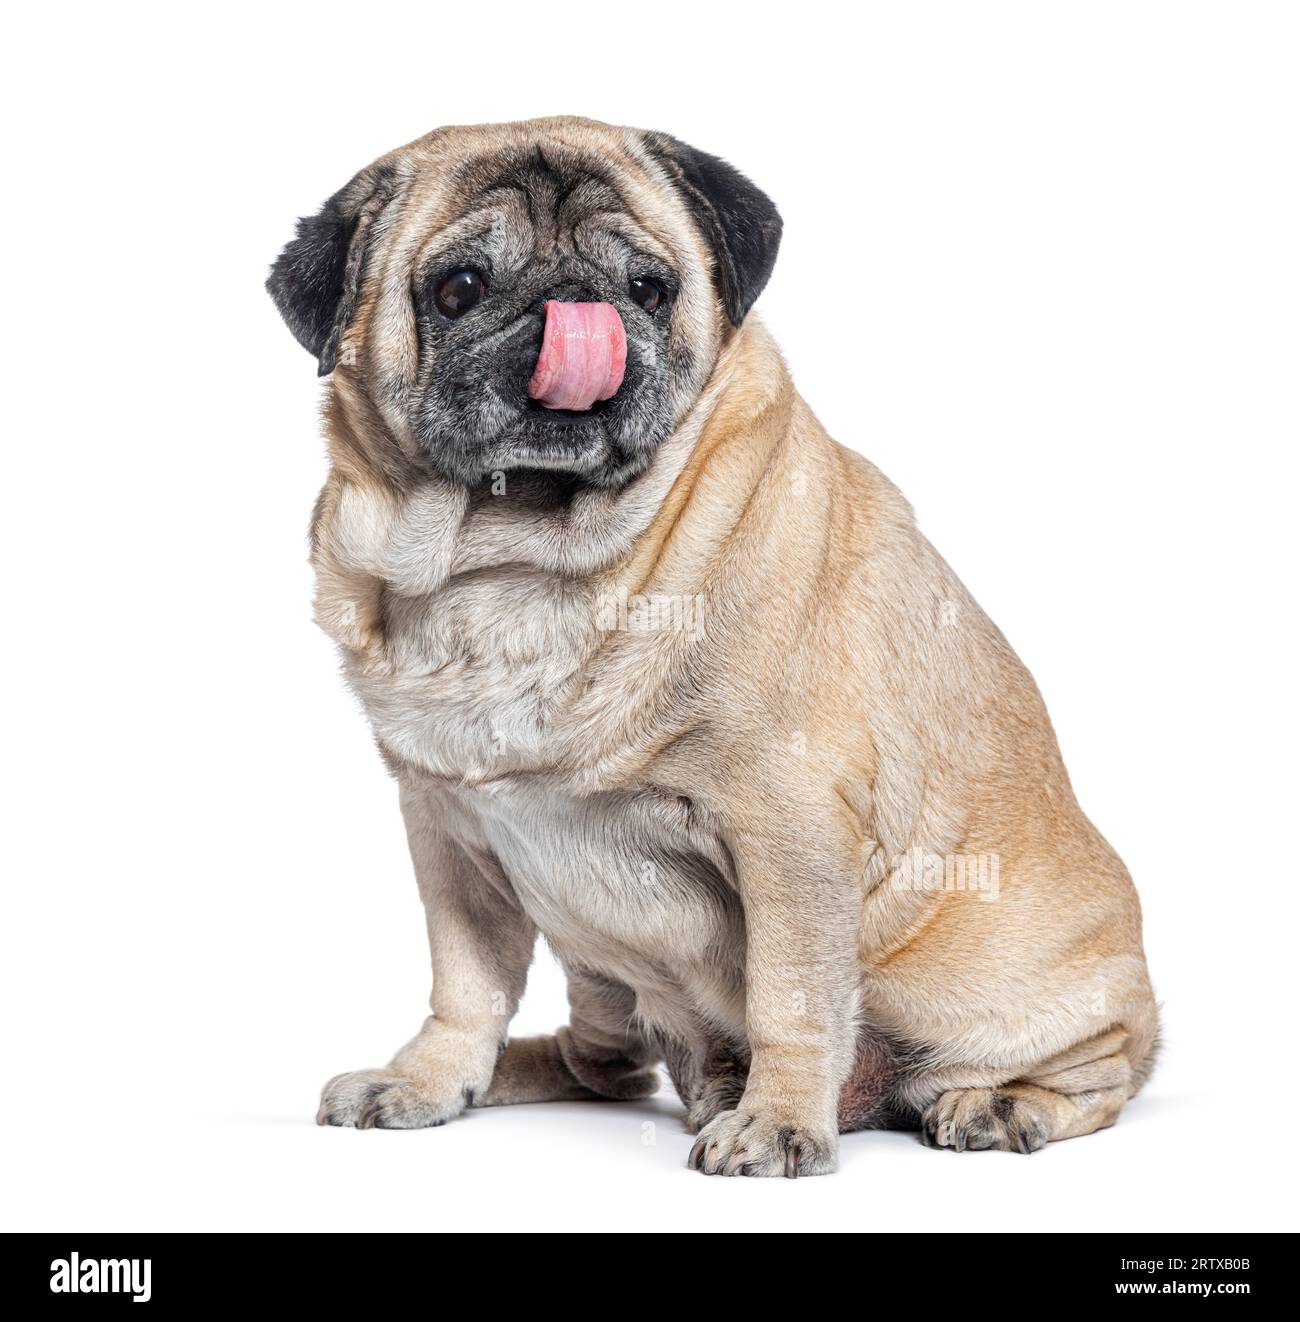 Seven Years old Pug dog sitting and licking itself, isolated on white Stock Photo